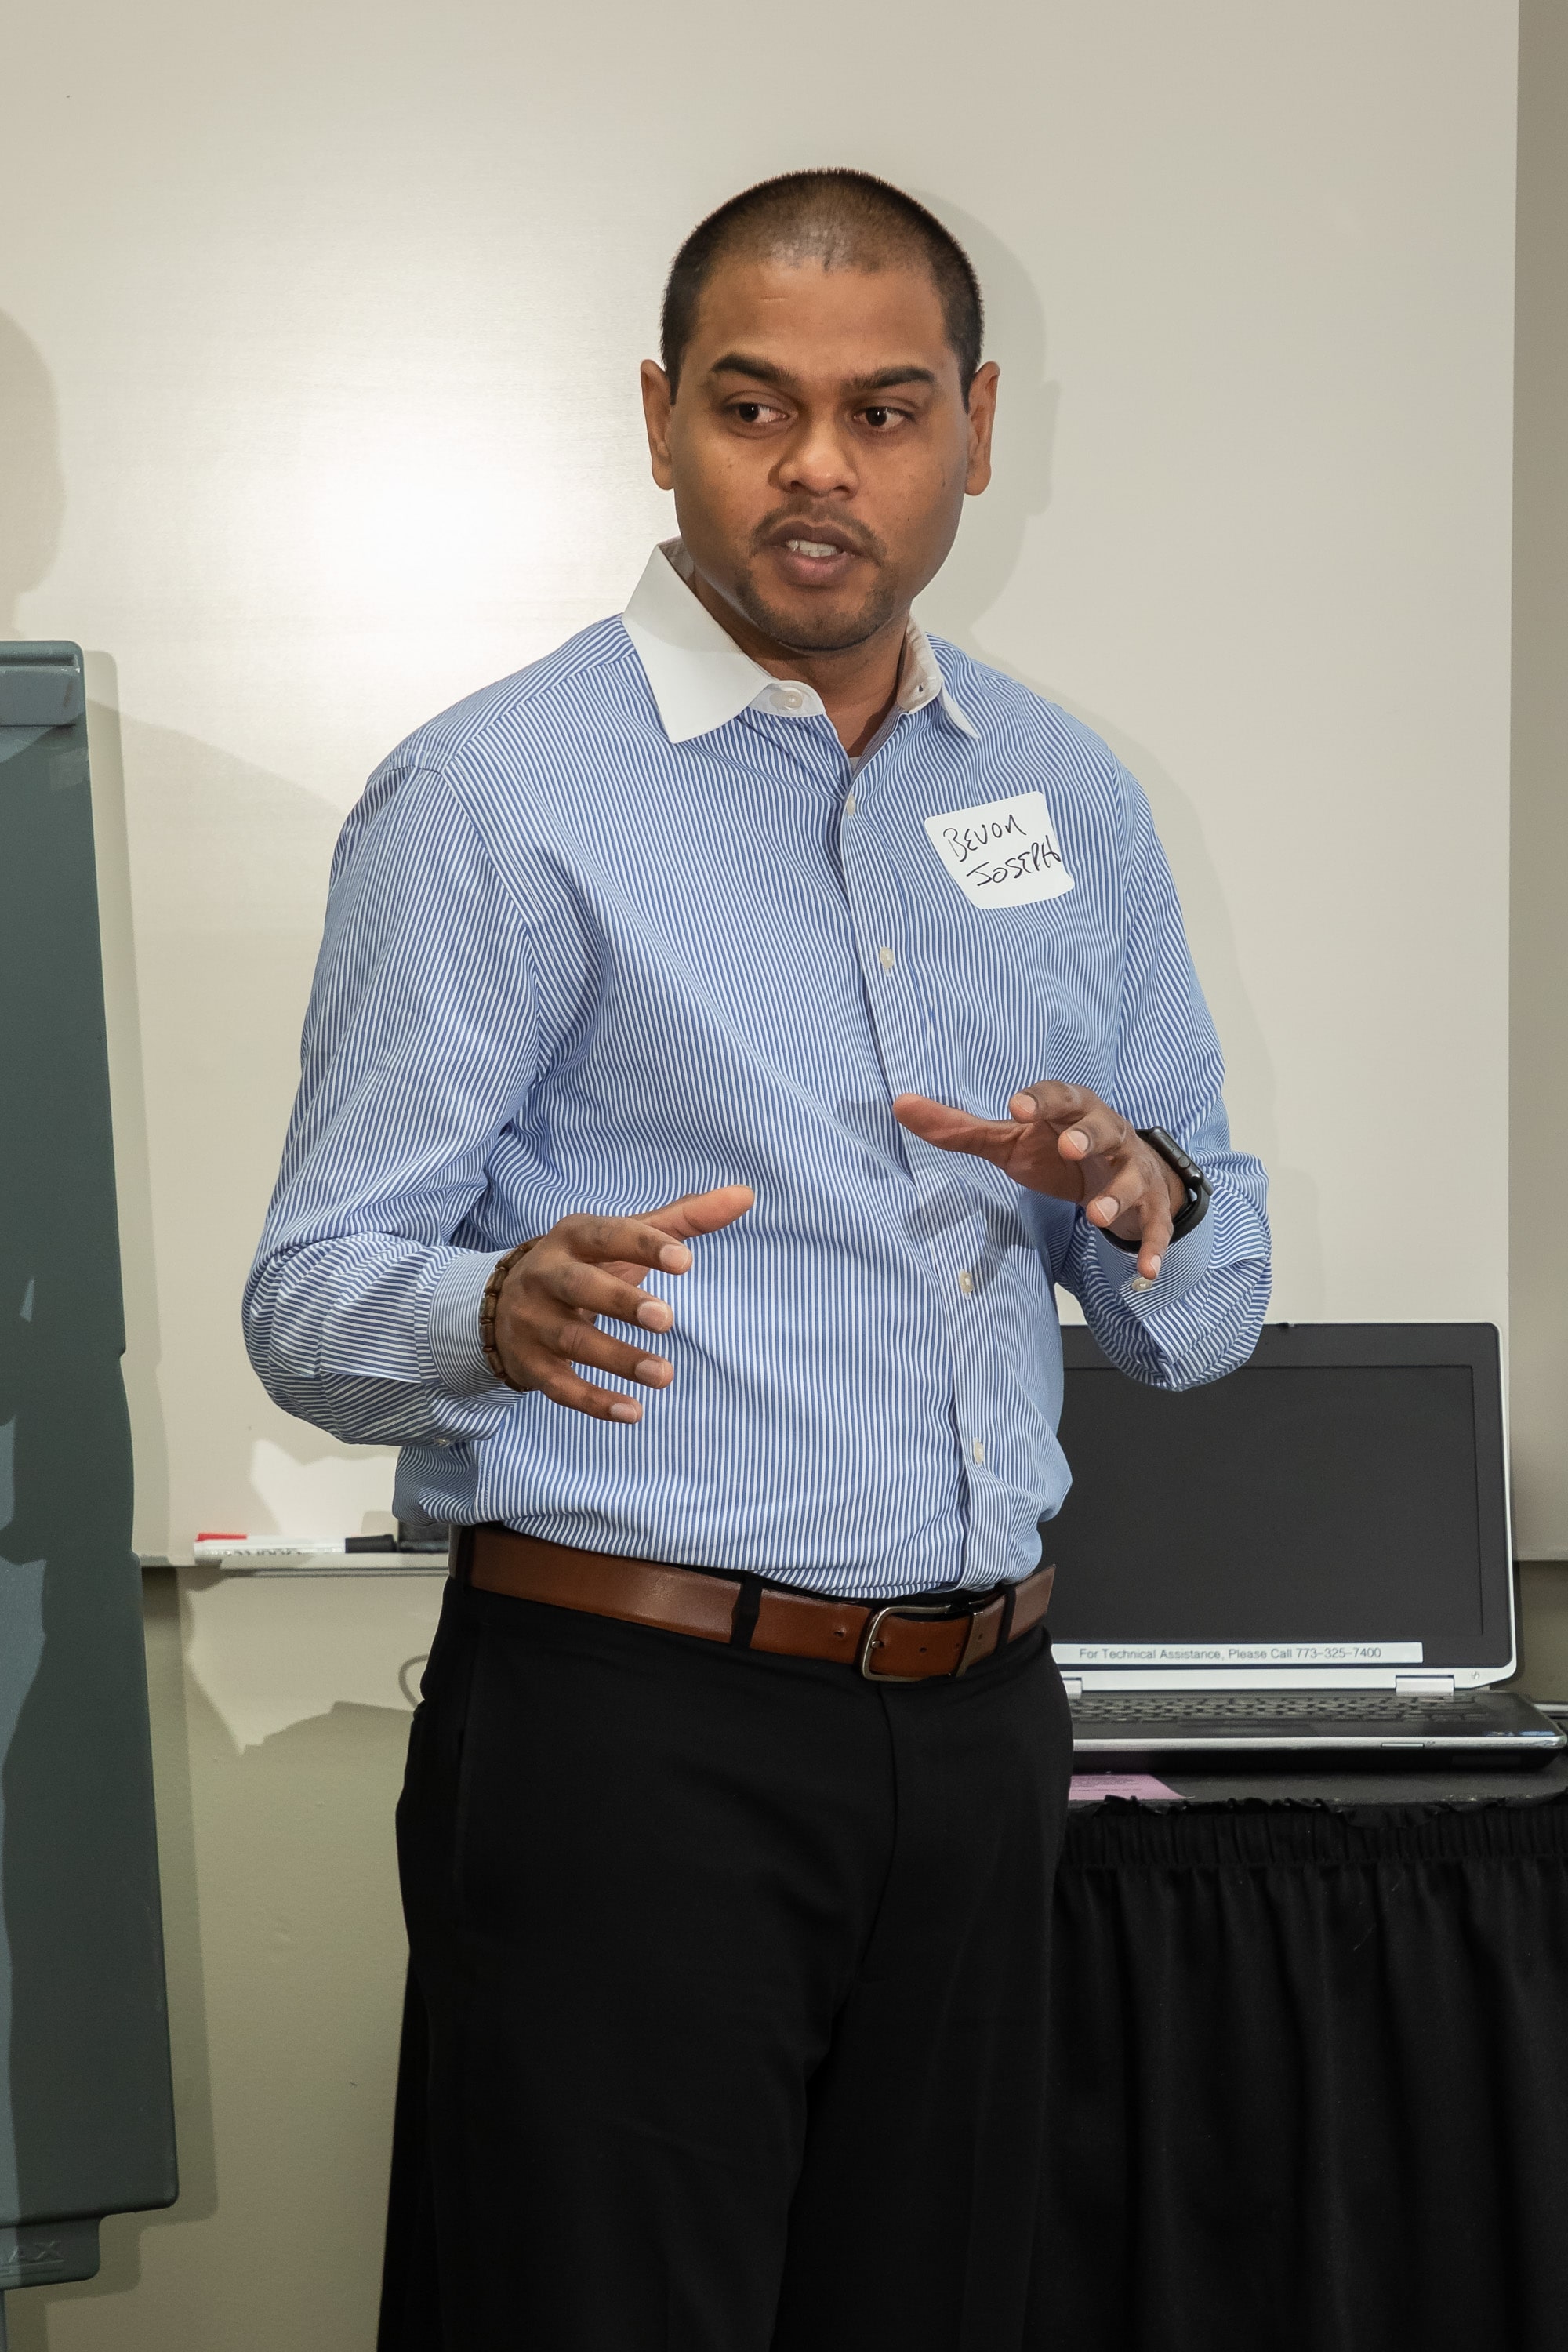 Meister Scholarship recipient Bevon Joseph gives a presentation on his non-profit, The Greenwood Project, at the 2018 Service Speaks Symposium. 